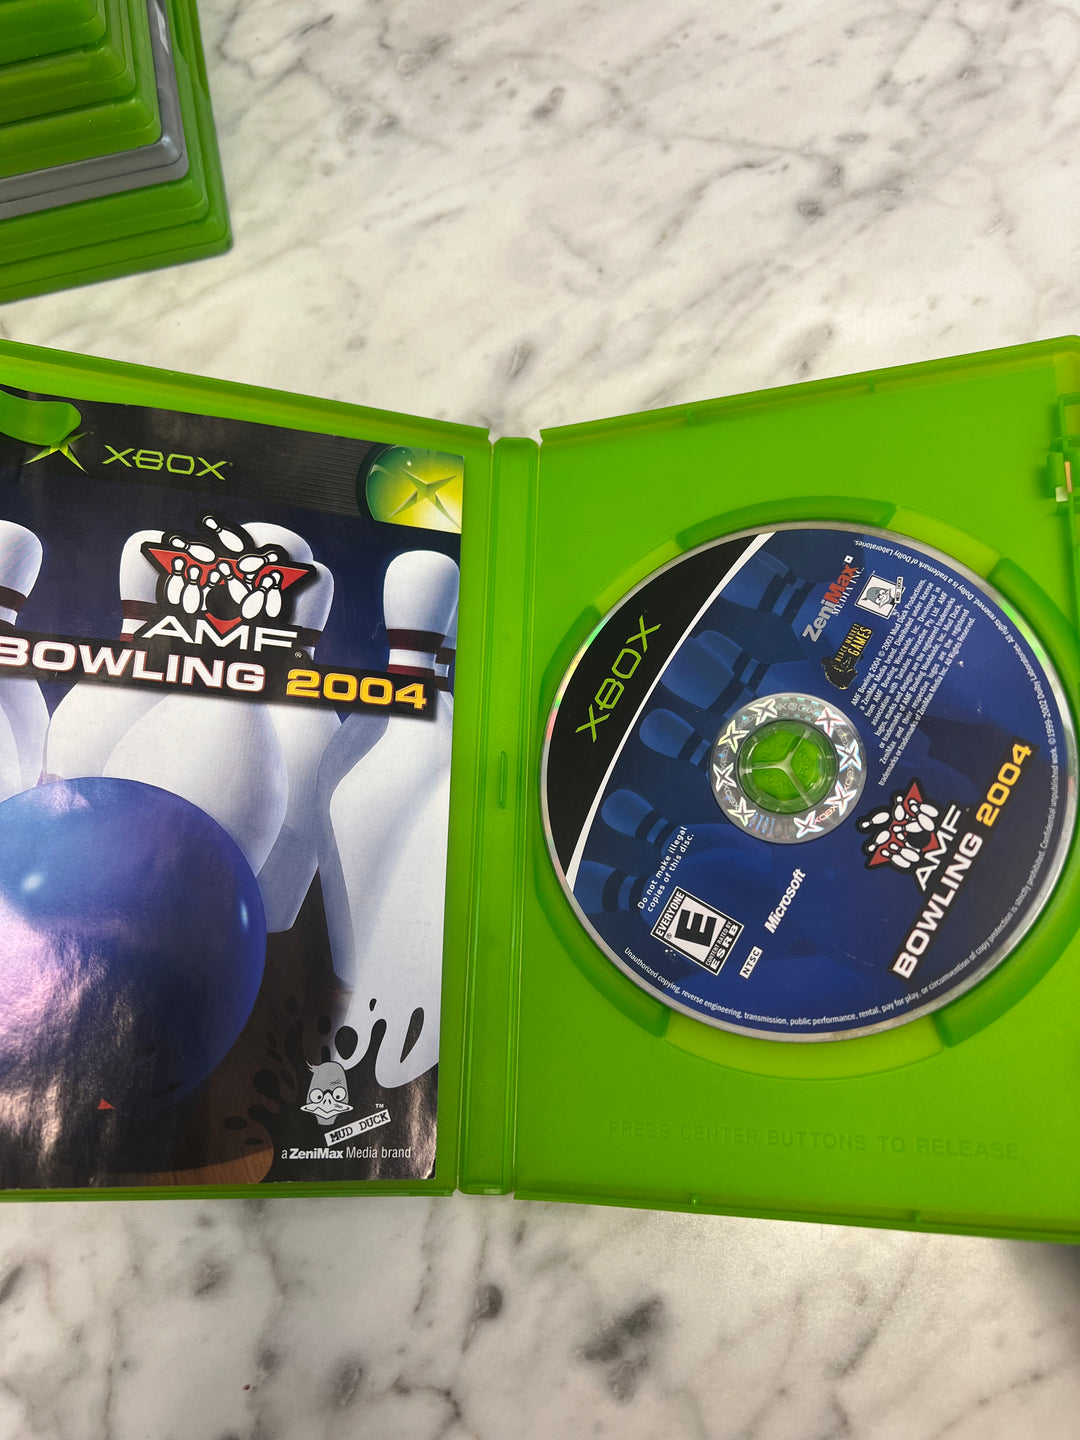 AMF Bowling 2004 for Original Microsoft Xbox in case. Tested and Working.     DO61124